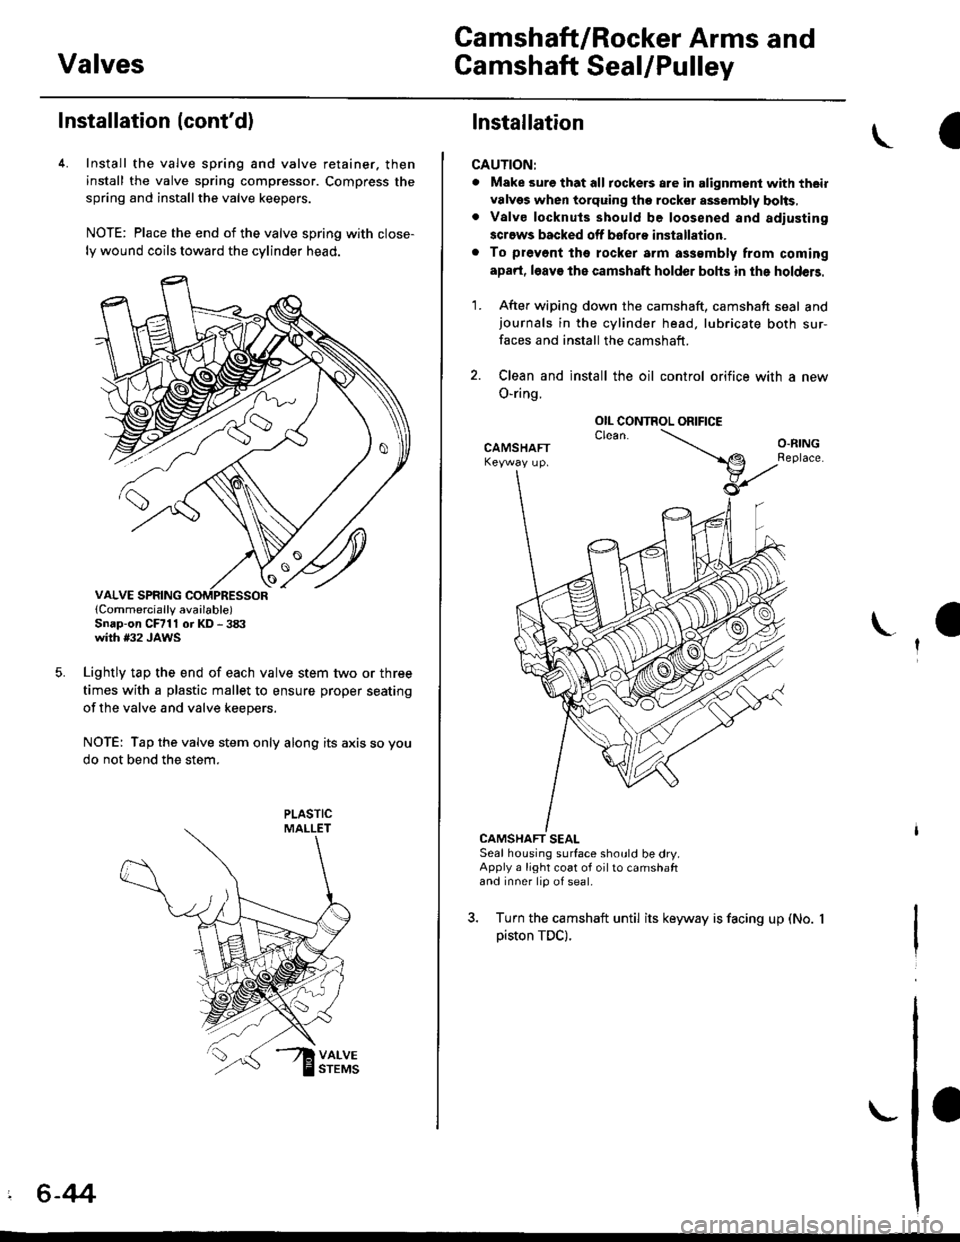 HONDA CIVIC 1996 6.G User Guide Valves
Camshaft/Rocker Arms and
Camshaft Seal/Pulley
Installation (contd)
4. Install the valve spring and valve retainer. then
install the valve spring compressor. Compress the
spring and installthe 